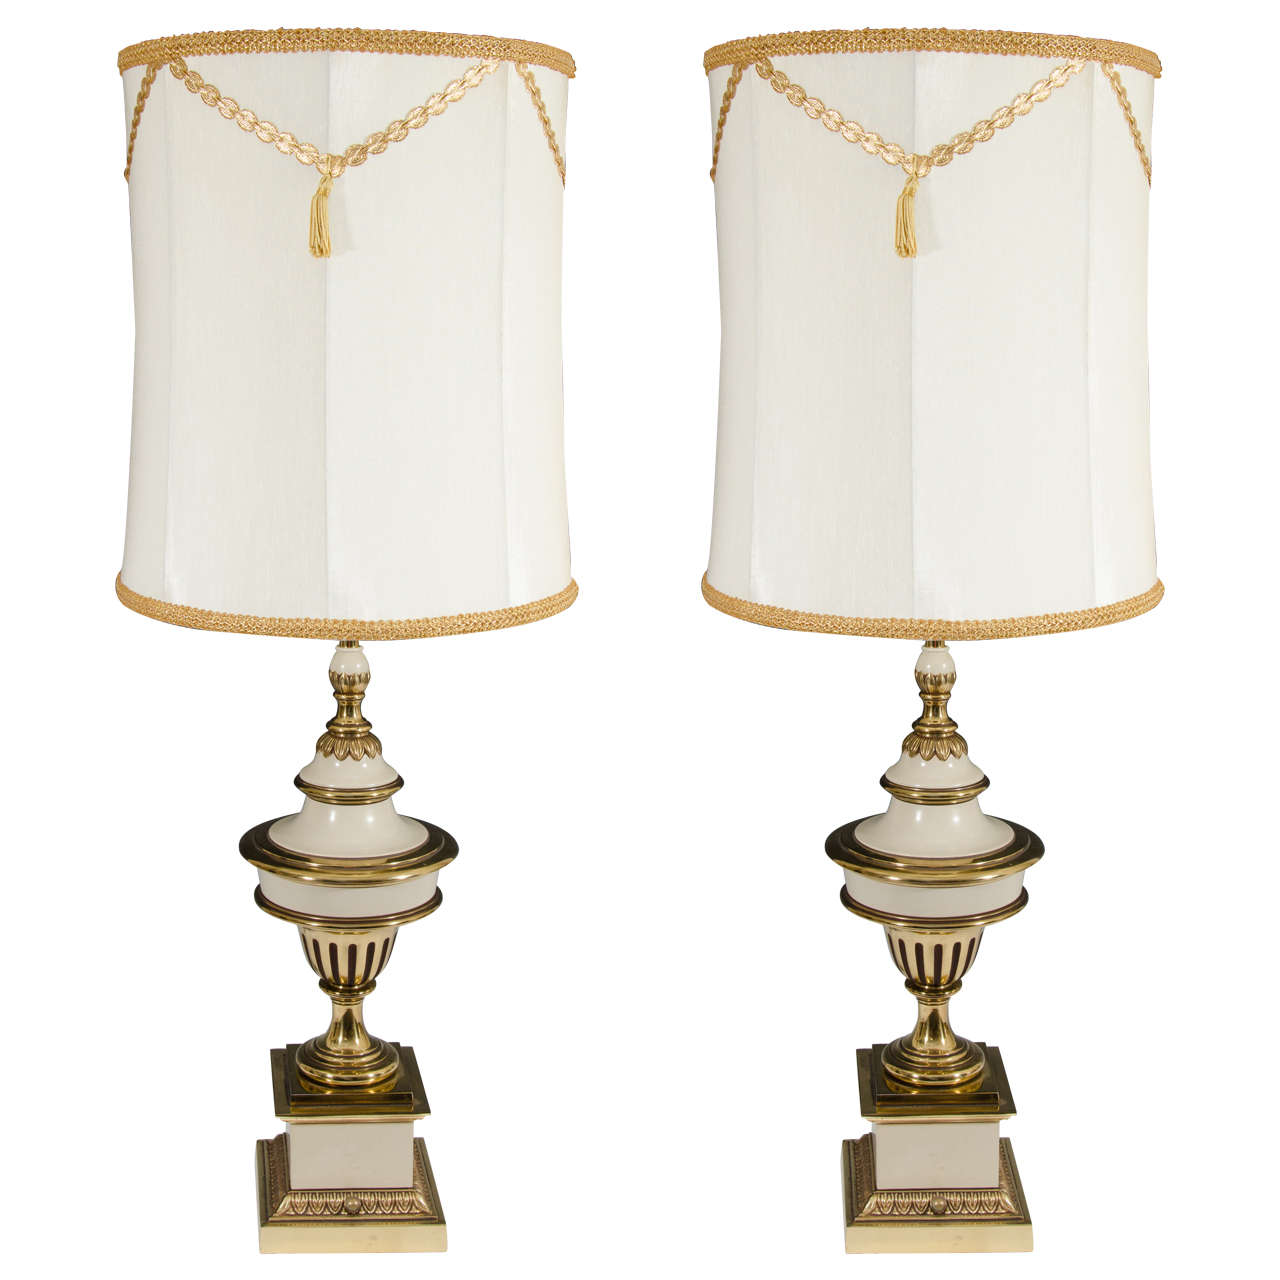 Hollywood Regency Style Pair of Brass Cream Colored Stiffel Table Lamps